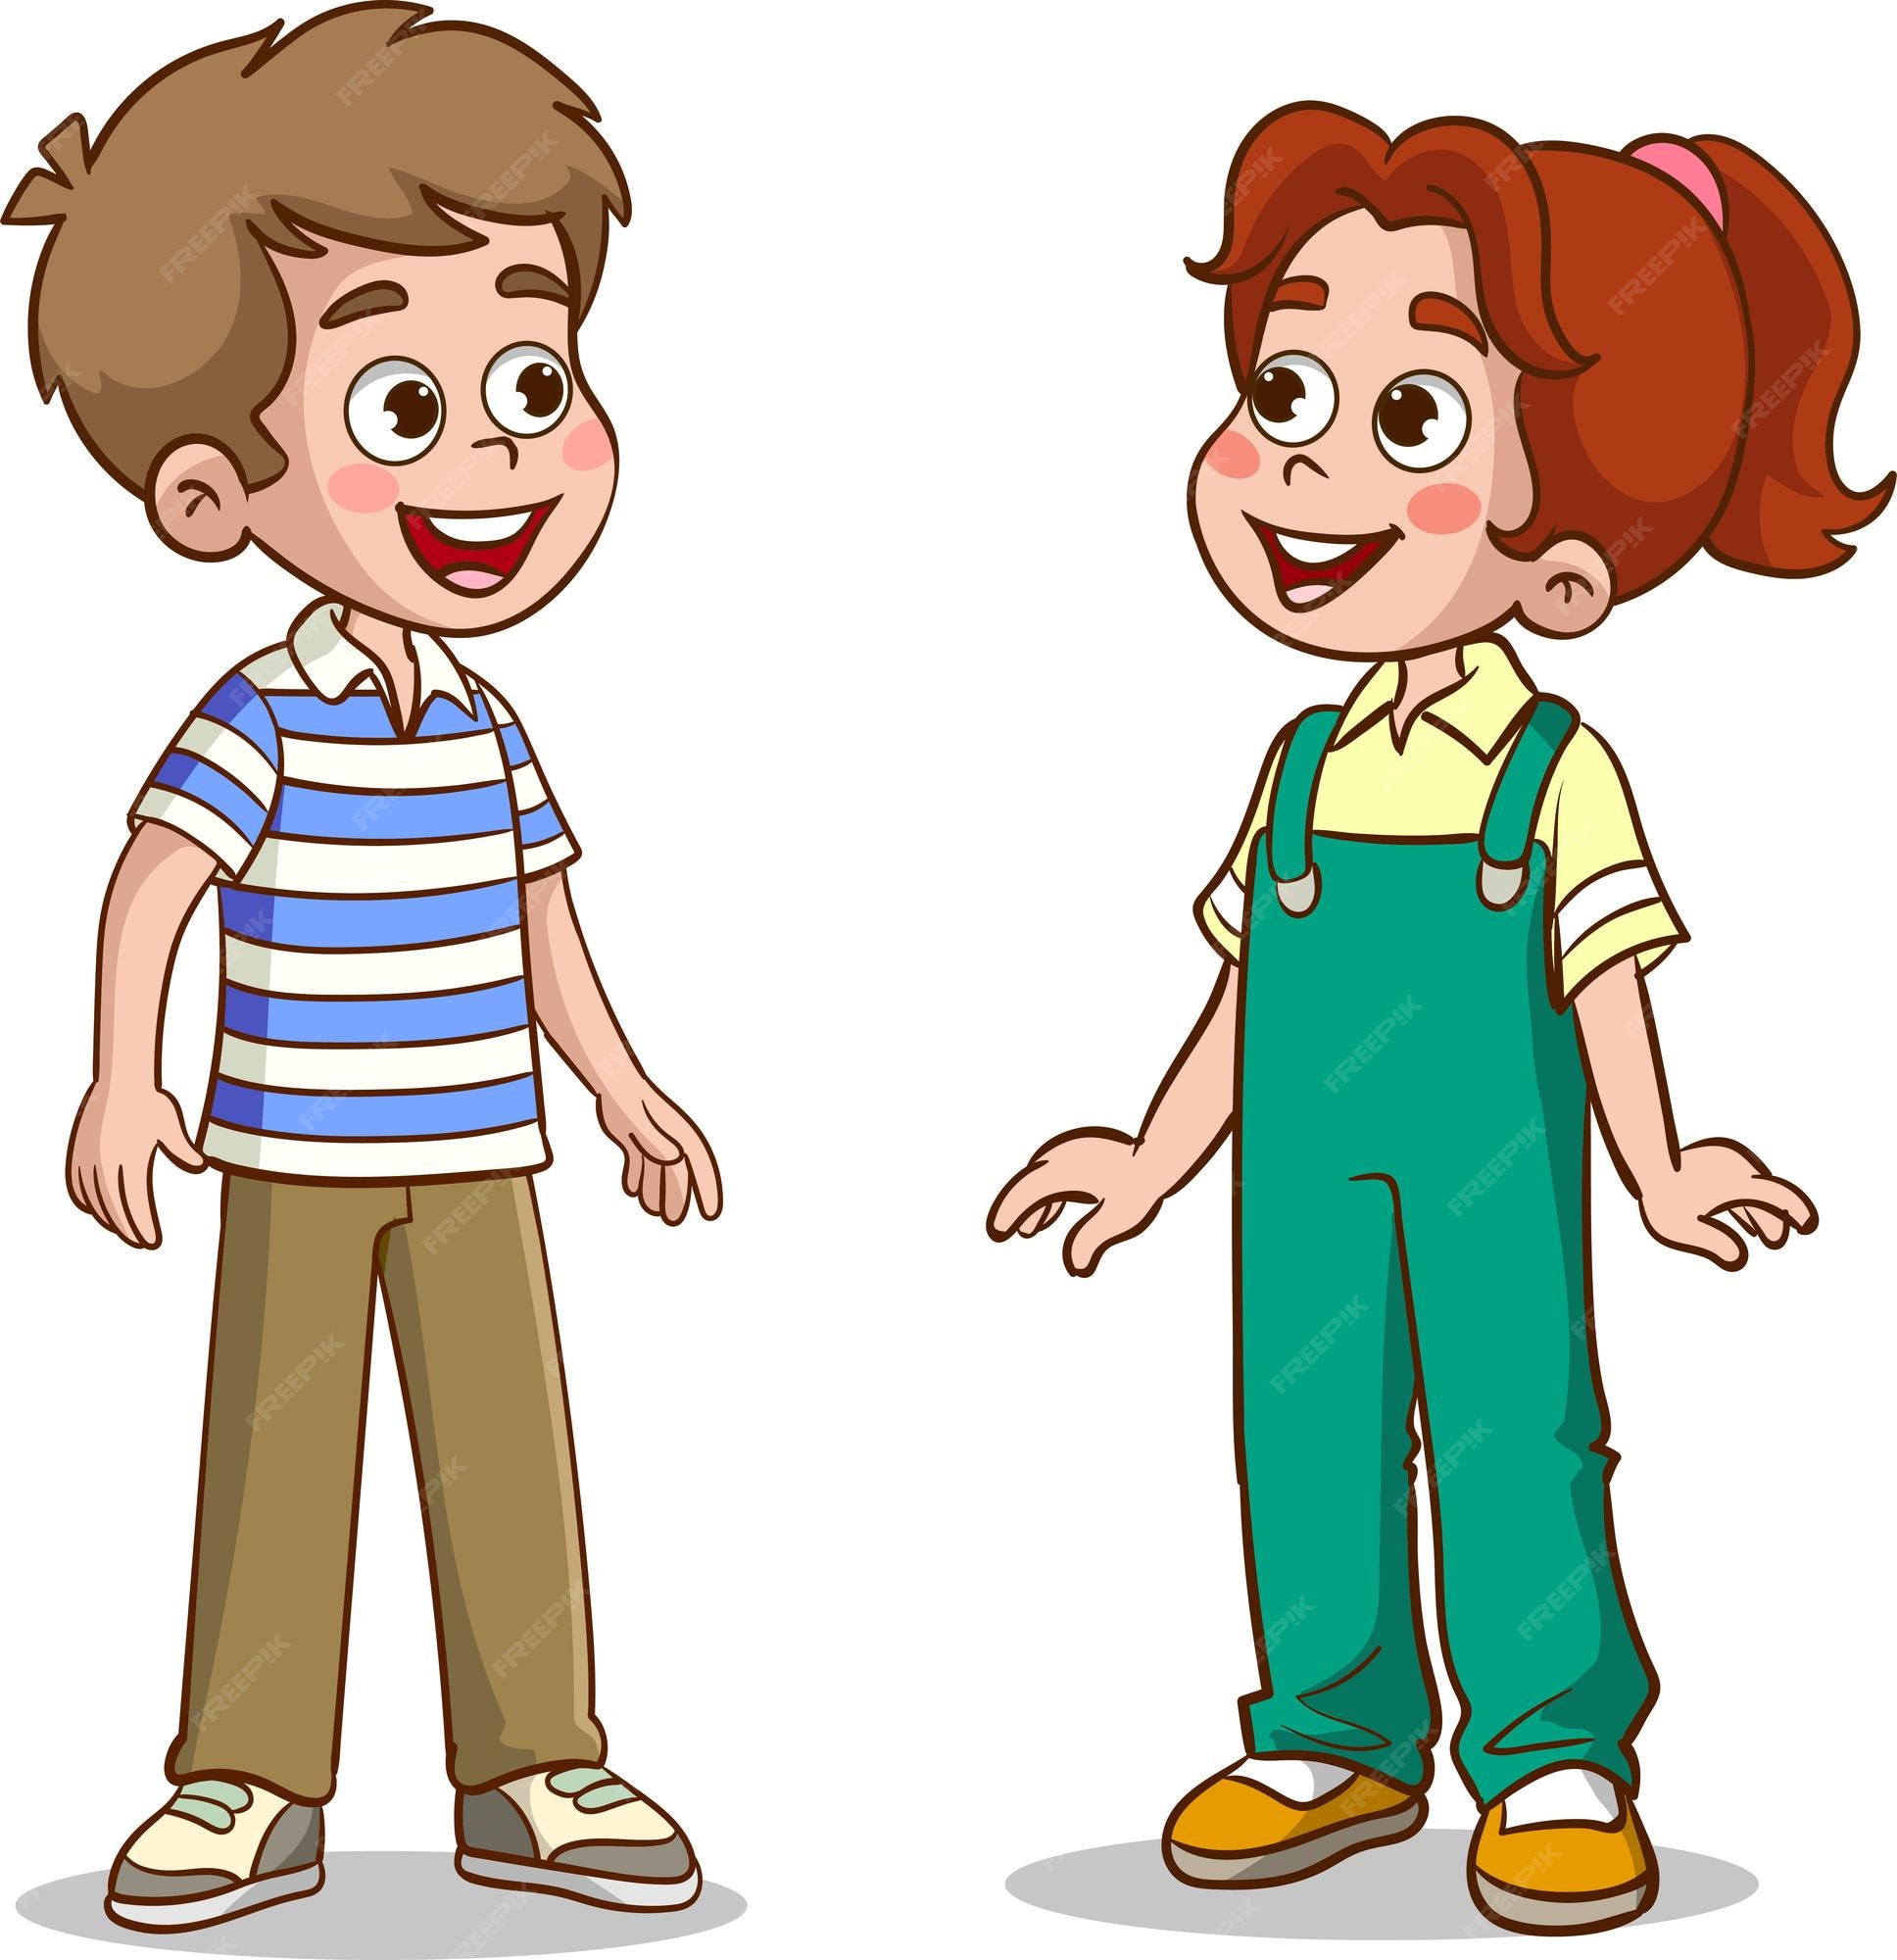 Premium Vector | Little kid say hello to friend and go to school together